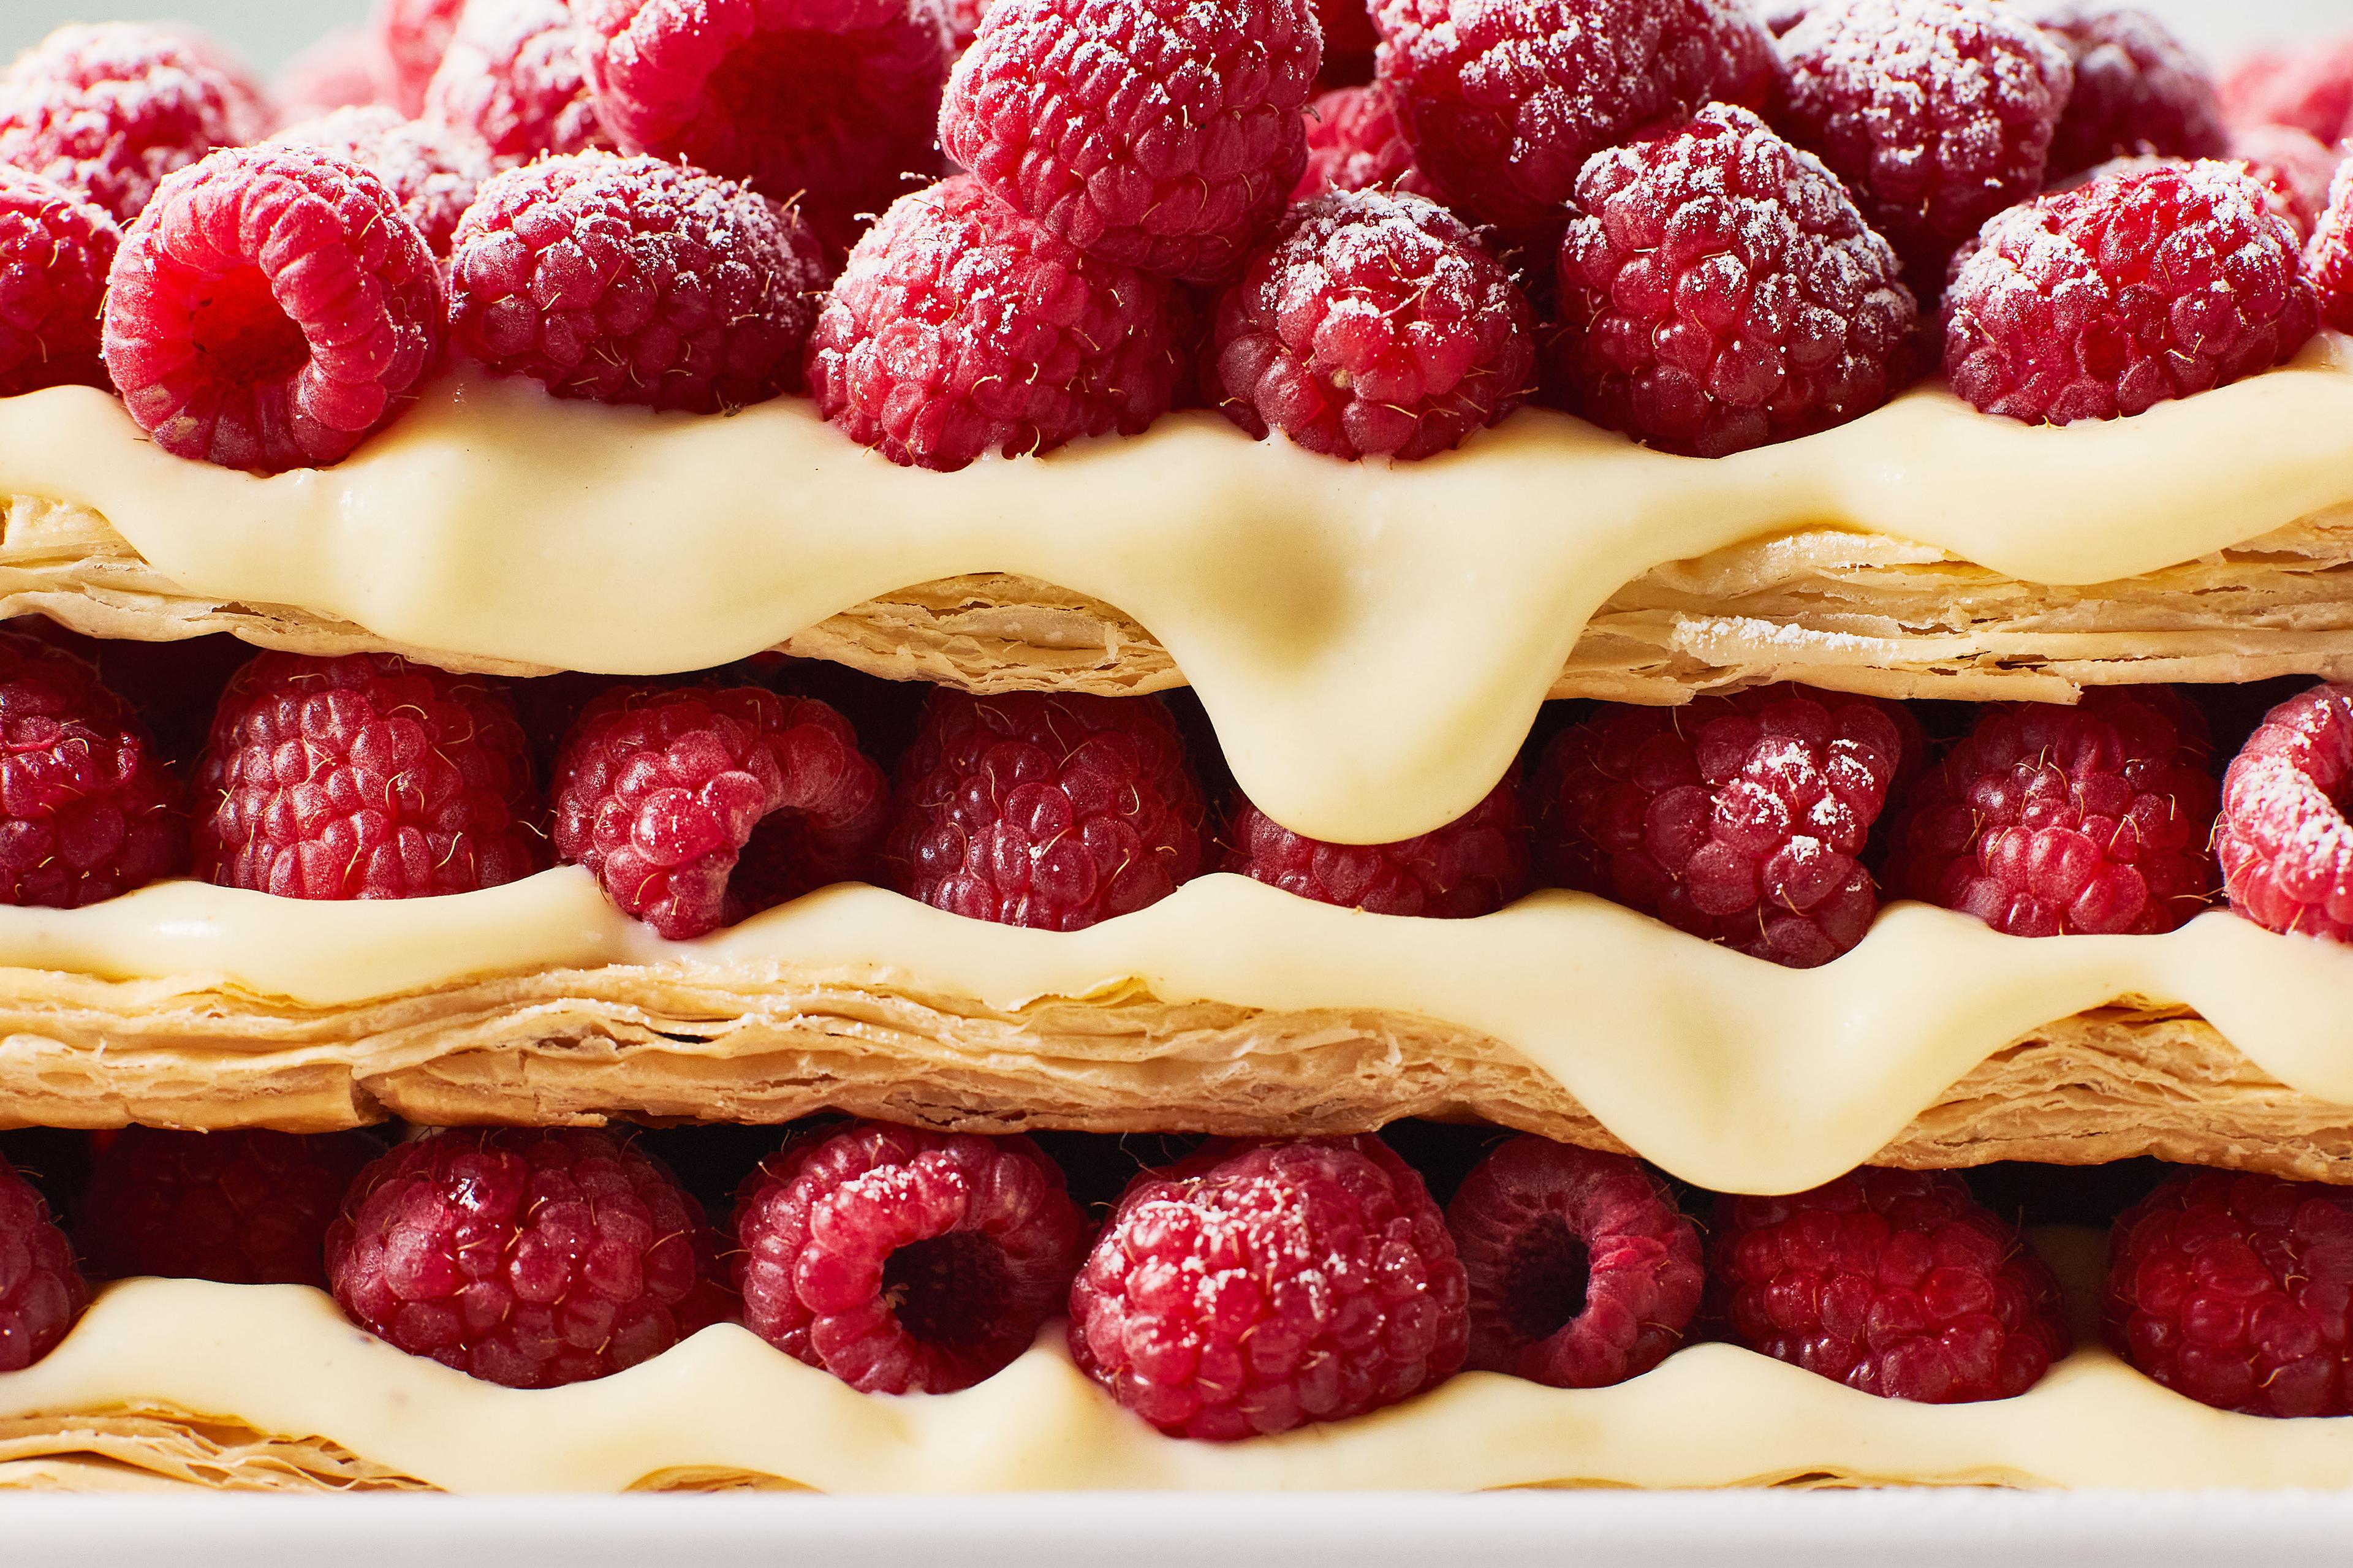 A delicious looking closeup of a raspberry puff pastry dessert with exquisitely and artfully dripping icing and some powdered sugar.